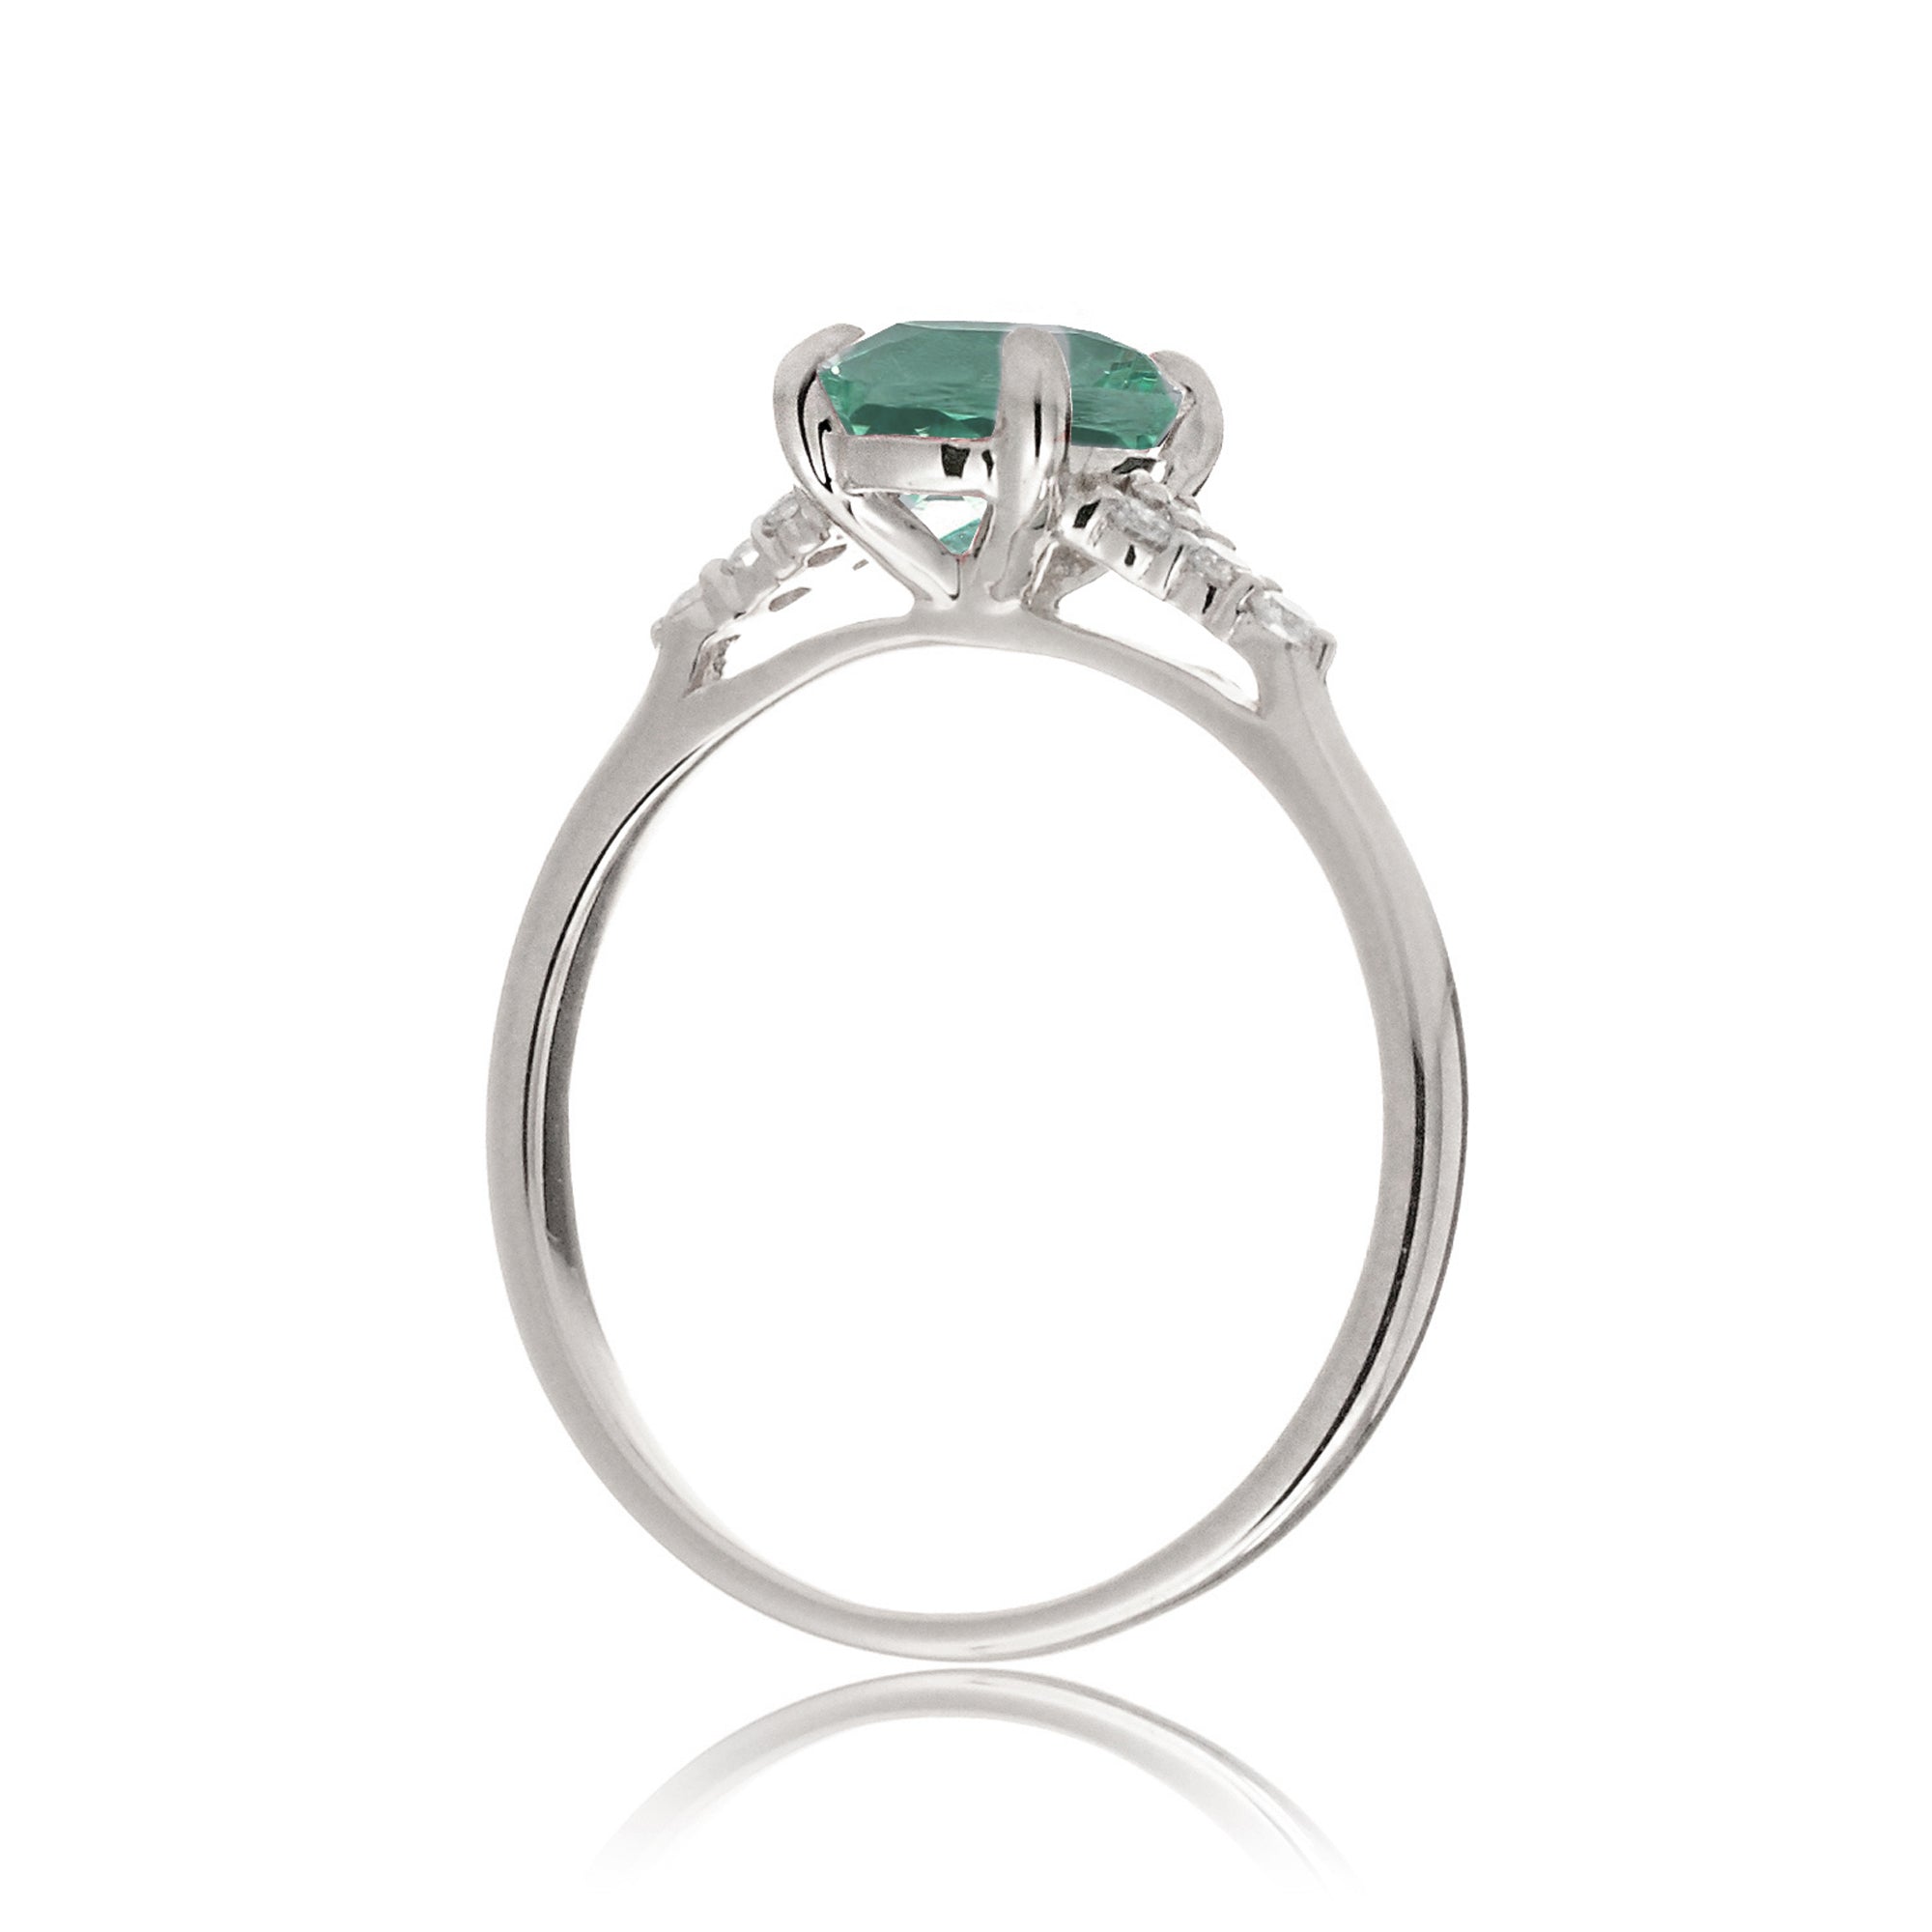 Pear cut green sapphire and diamond engagement ring in white  gold - the Chloe lab-grown